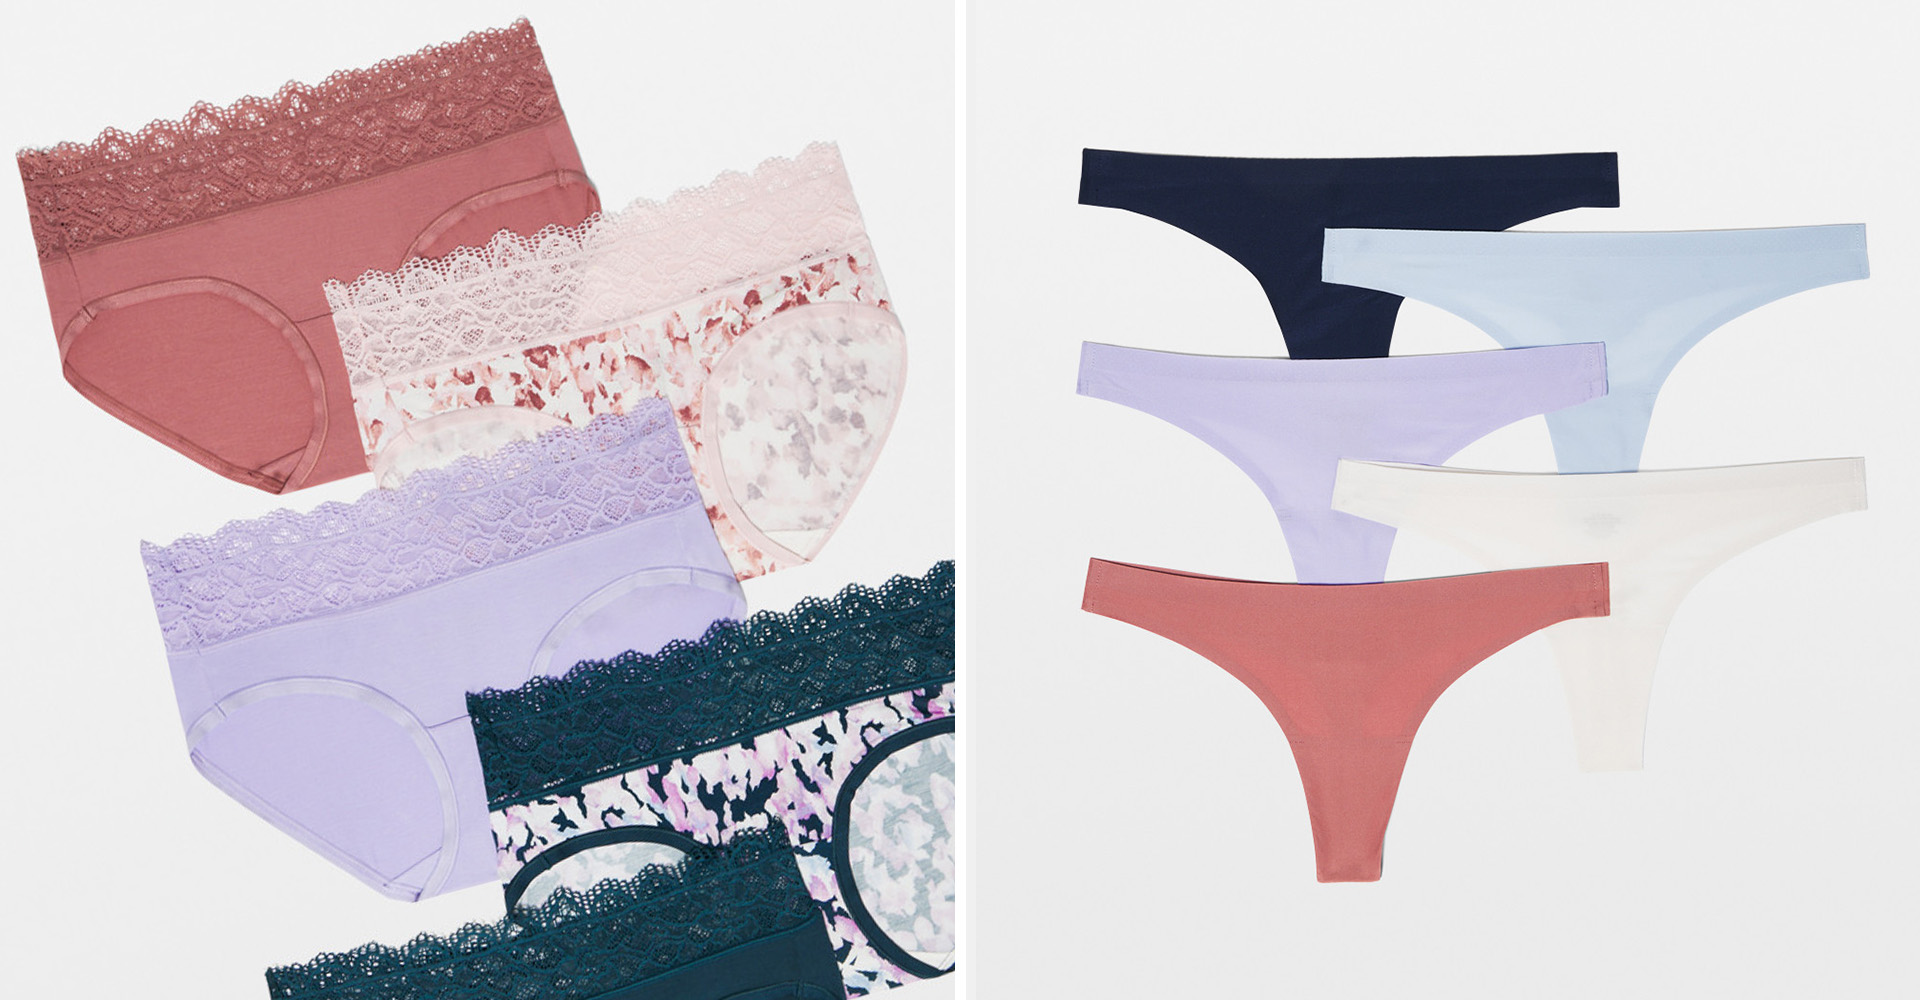 Soma<sup class=st-superscript>®</sup> laydown of lace-trim brief panties in a variety of colors and prints. Soma<sup class=st-superscript>®</sup> laydown of thongs in a variety of solid colors.